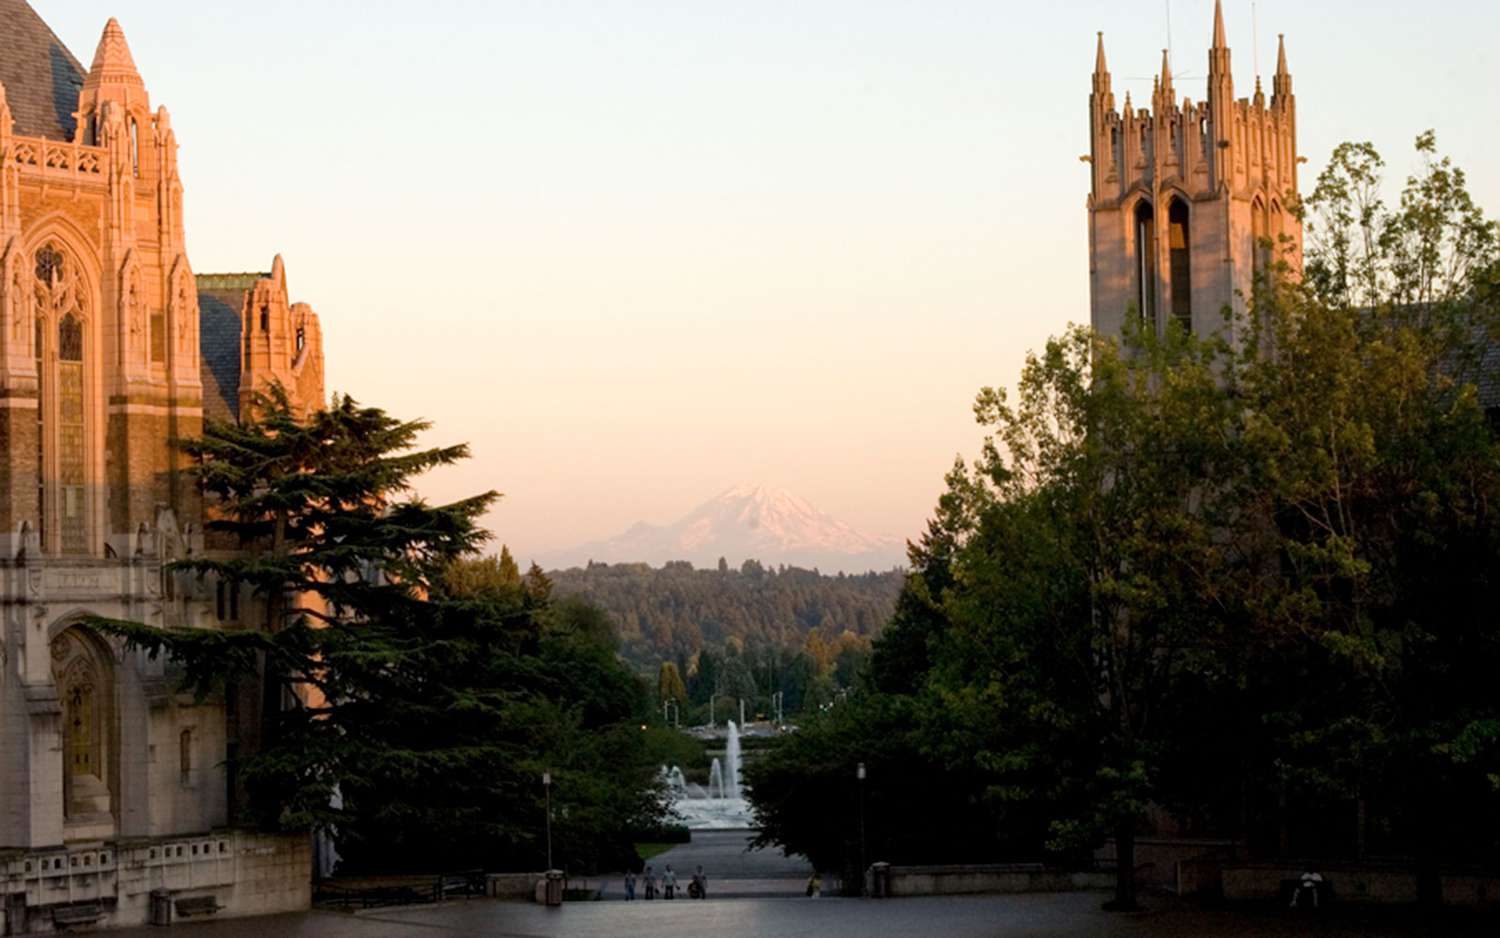 America’s Most Beautiful College Campuses